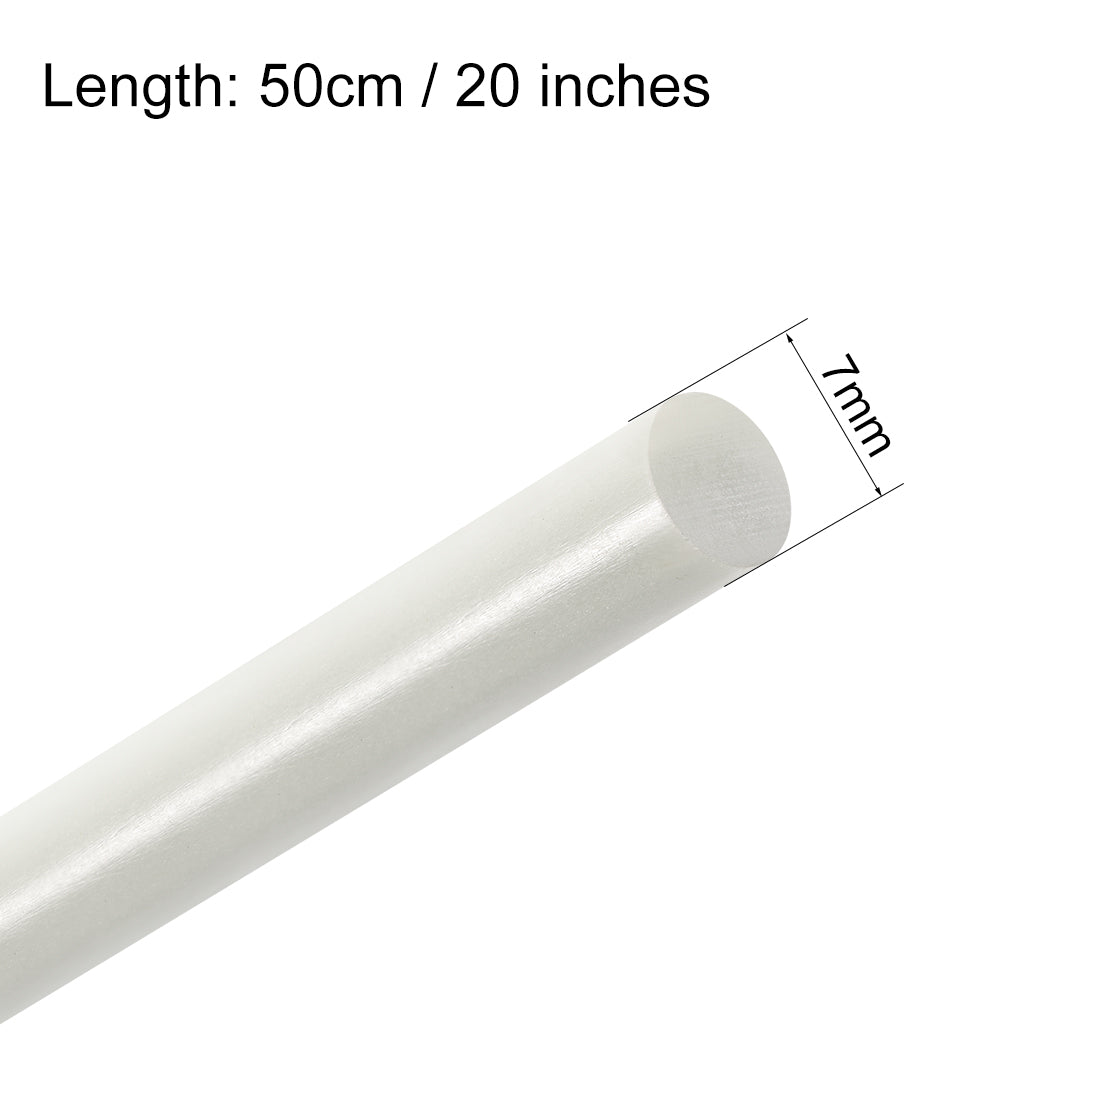 uxcell Uxcell FRP Fiberglass Round Rod,7mm Dia 50cm Long,White Engineering Round Bars 3pcs